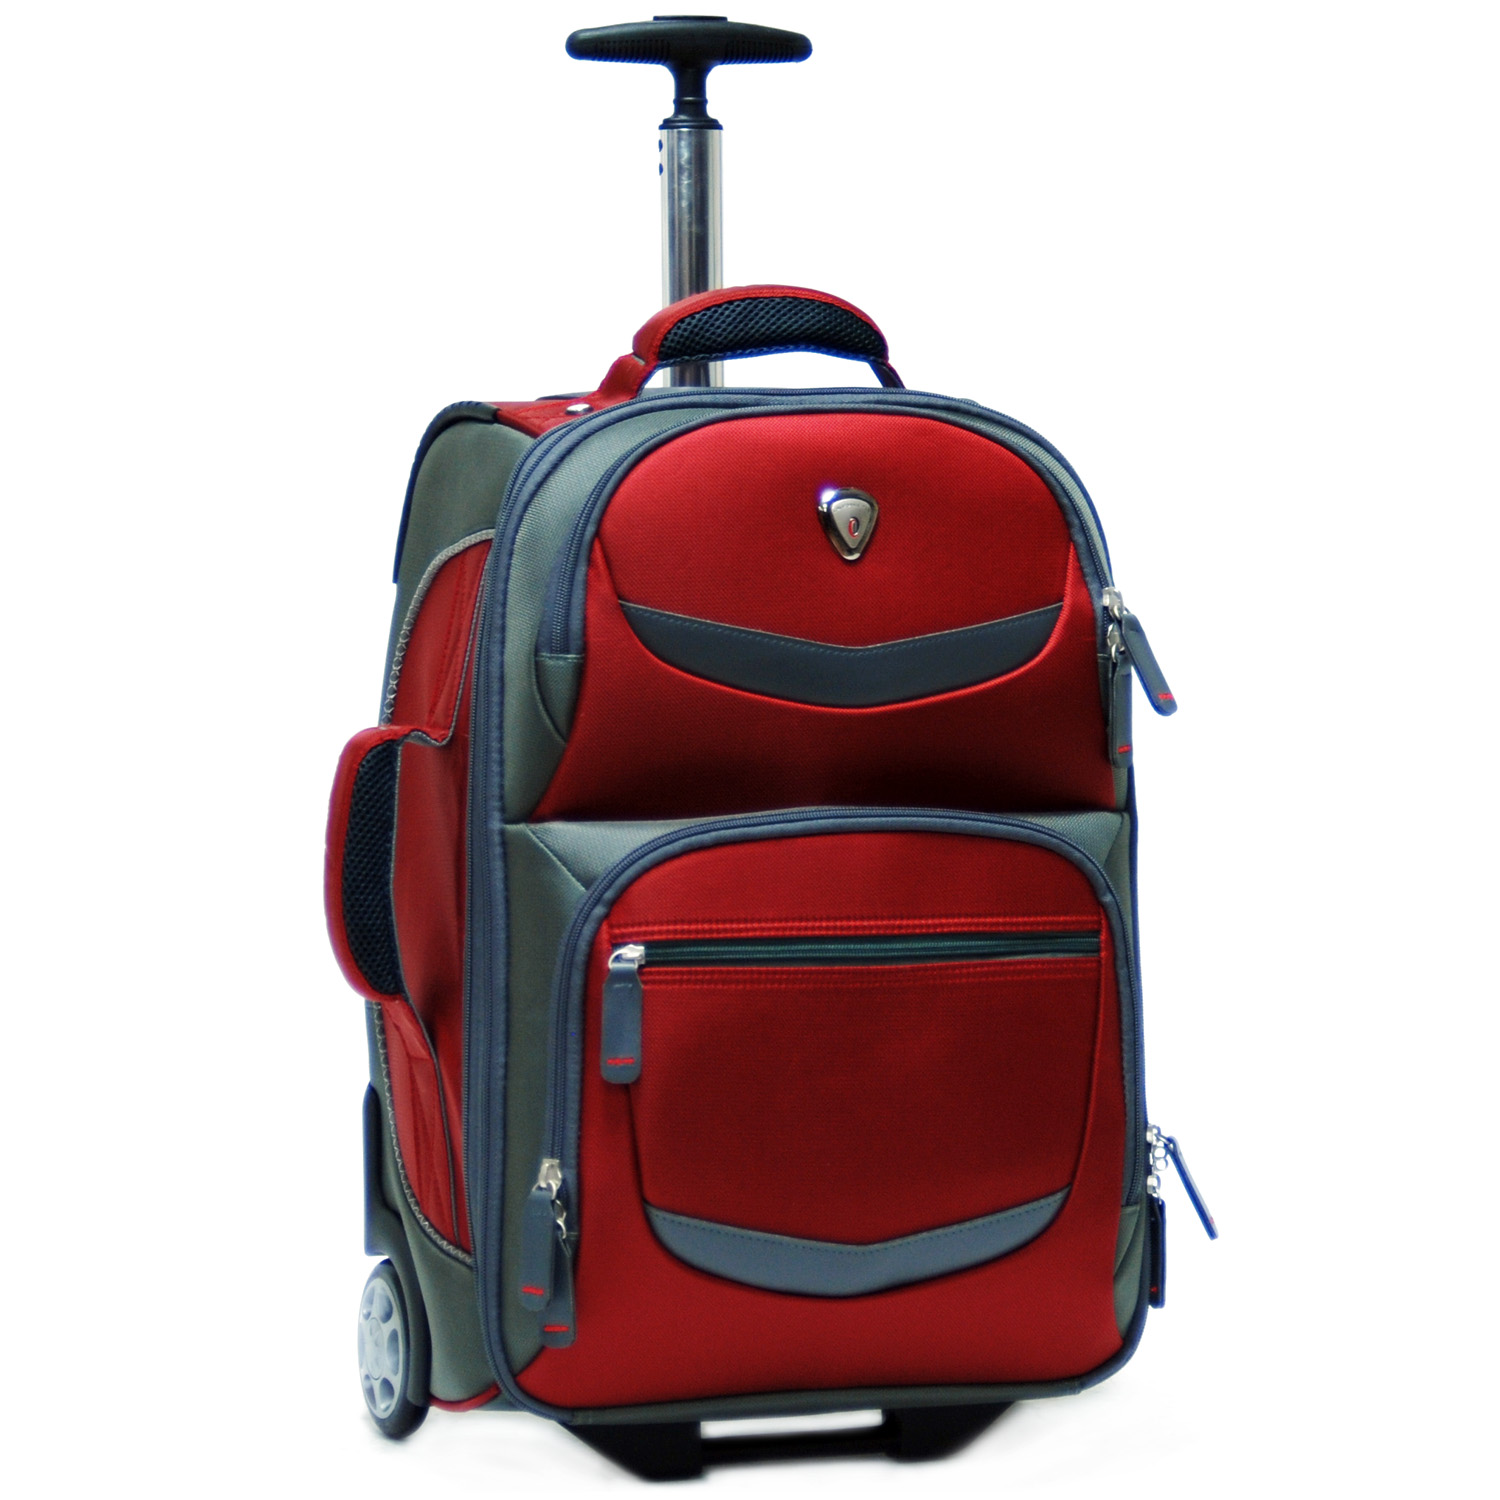 19" Deluxe Laptop Rolling Backpack (Discover)